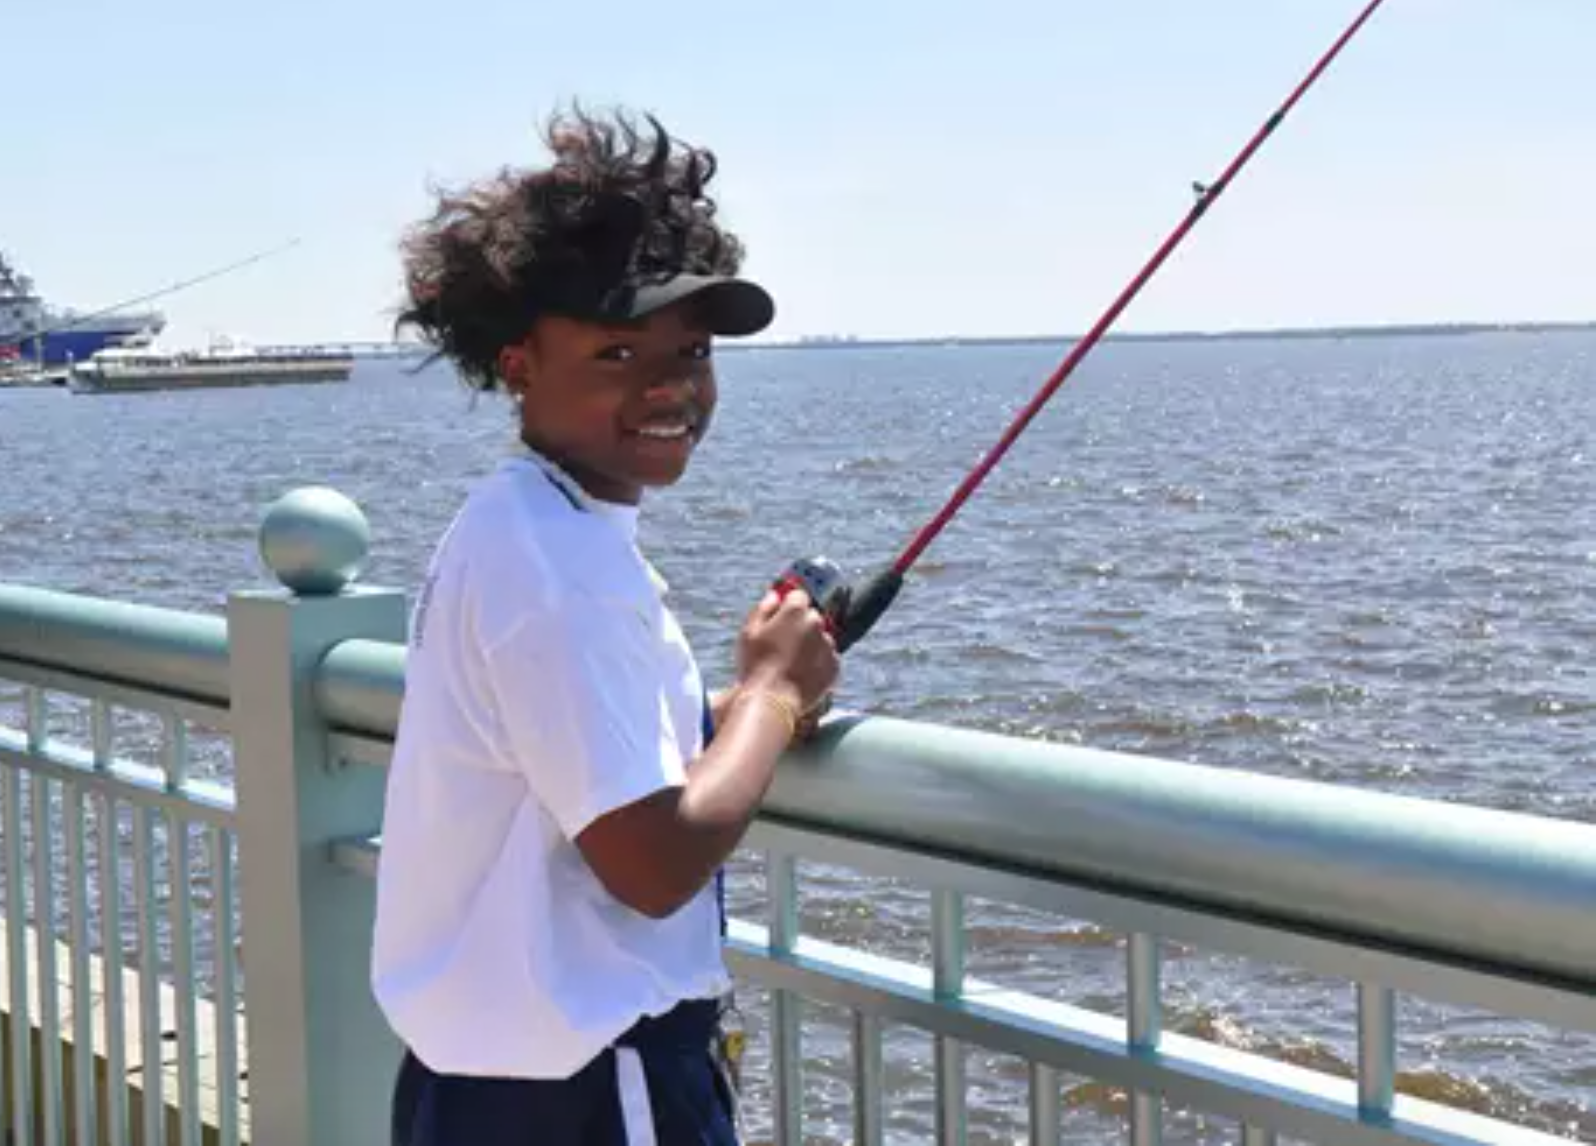 Let's Go Fishing With Kids Florida Style - My Family Travels